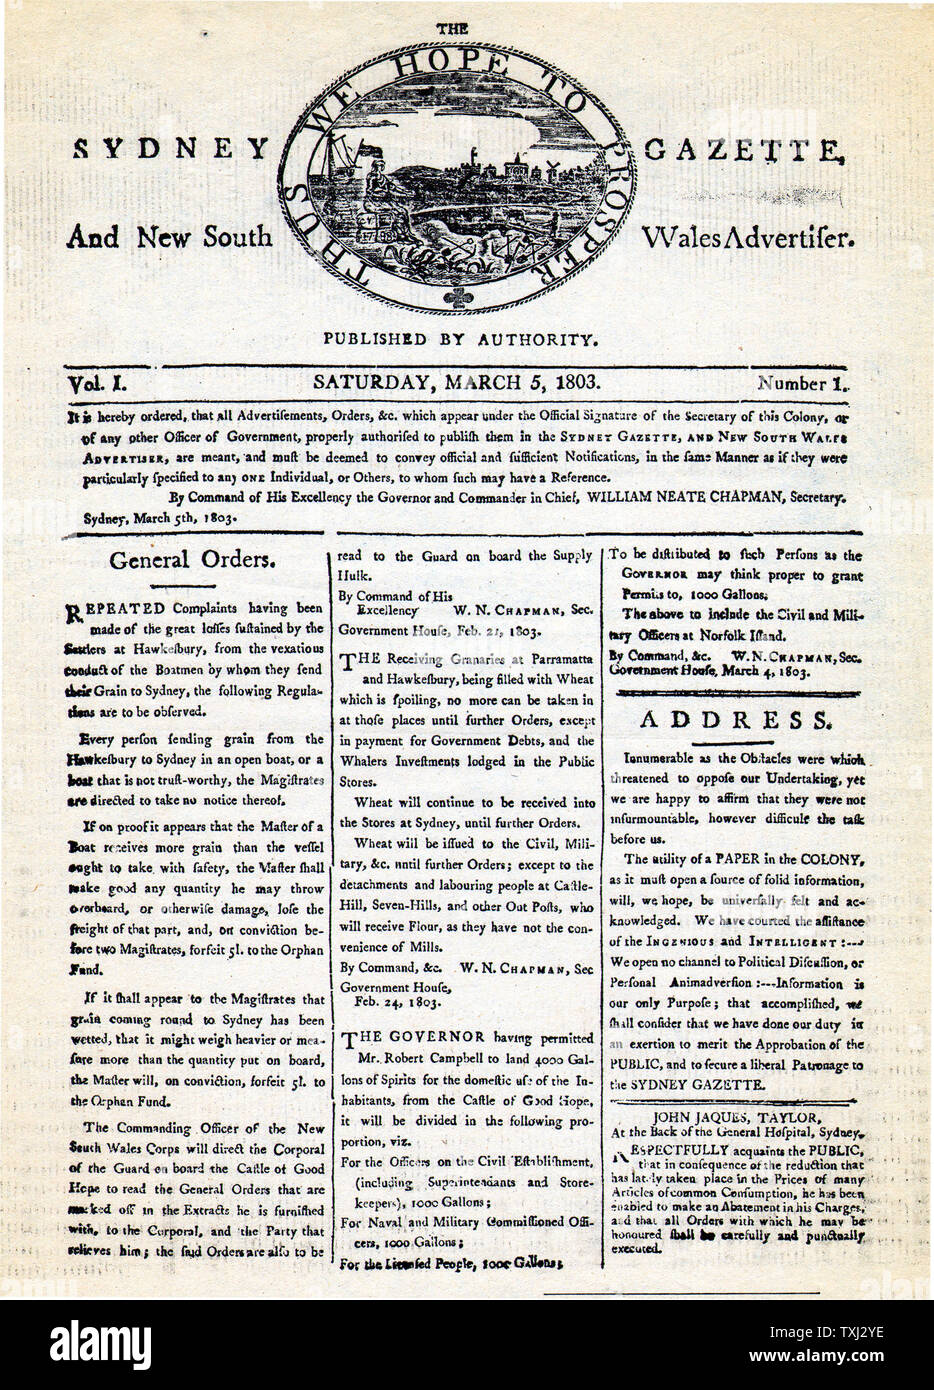 Sydney Gazette 5th March 1803 front page No. 1 edition Stock Photo